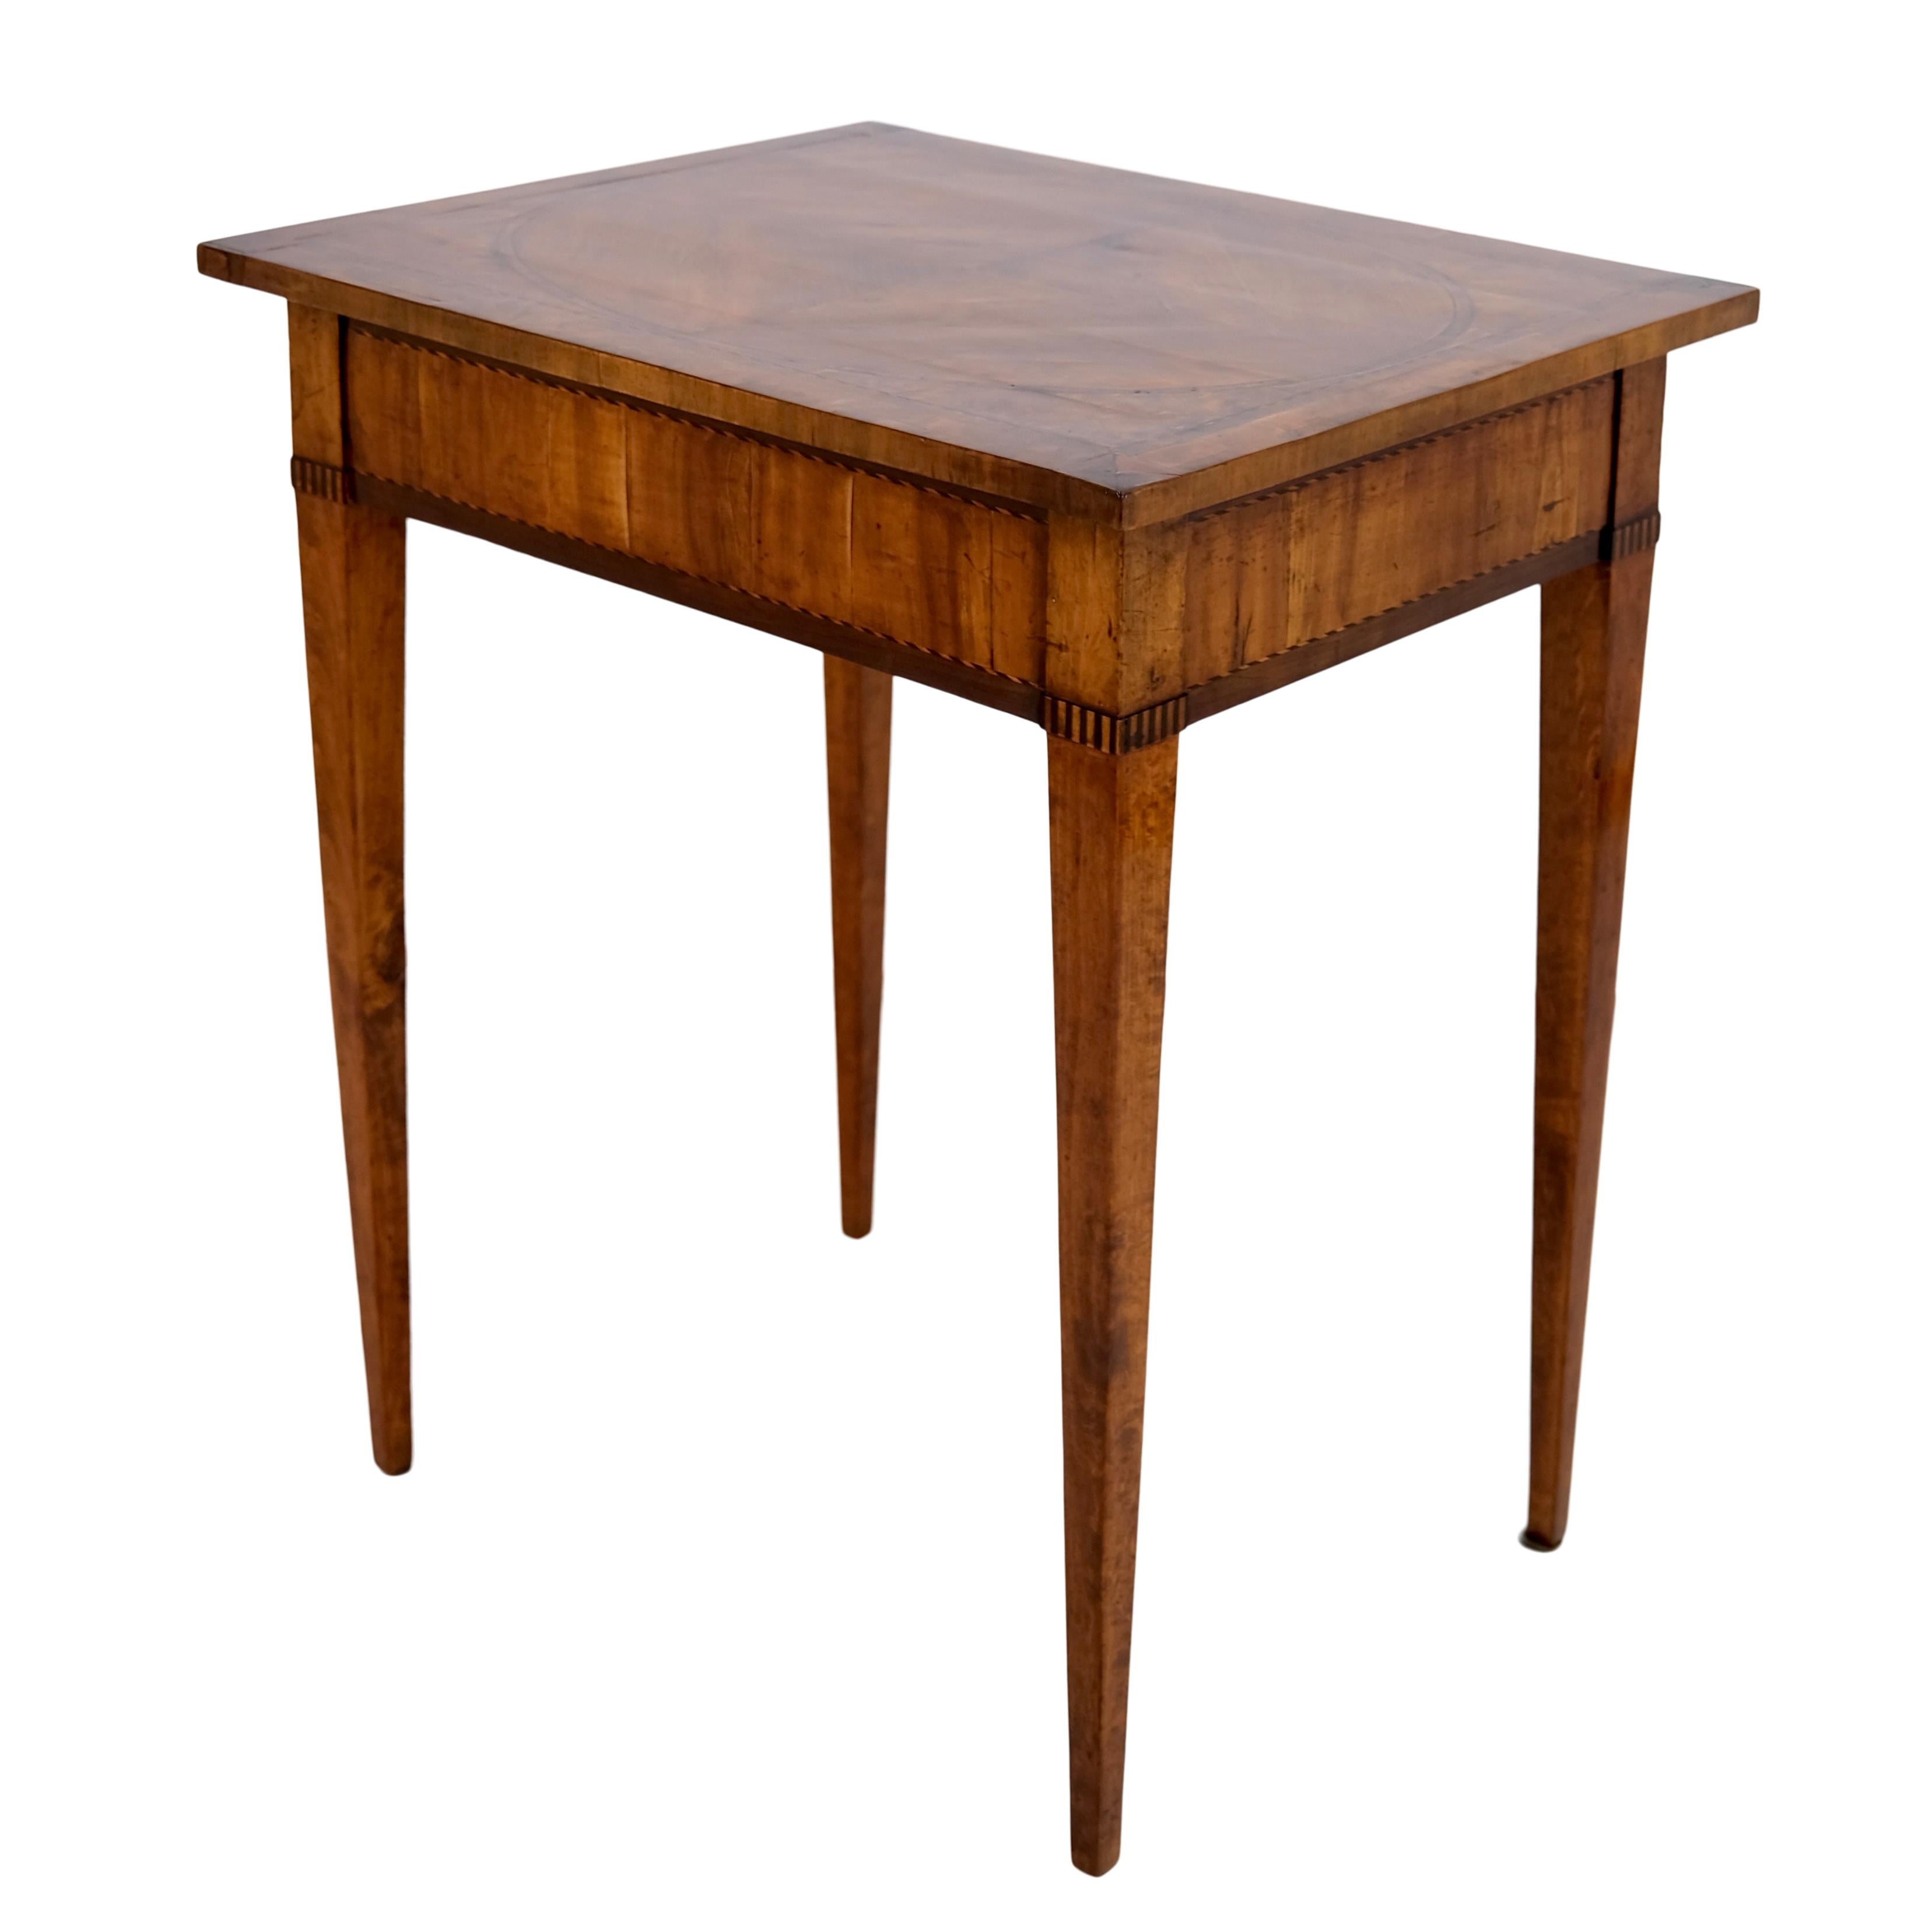 French Handpolished 1780s Louis Seize XVI Side Table in Cherry Wood For Sale